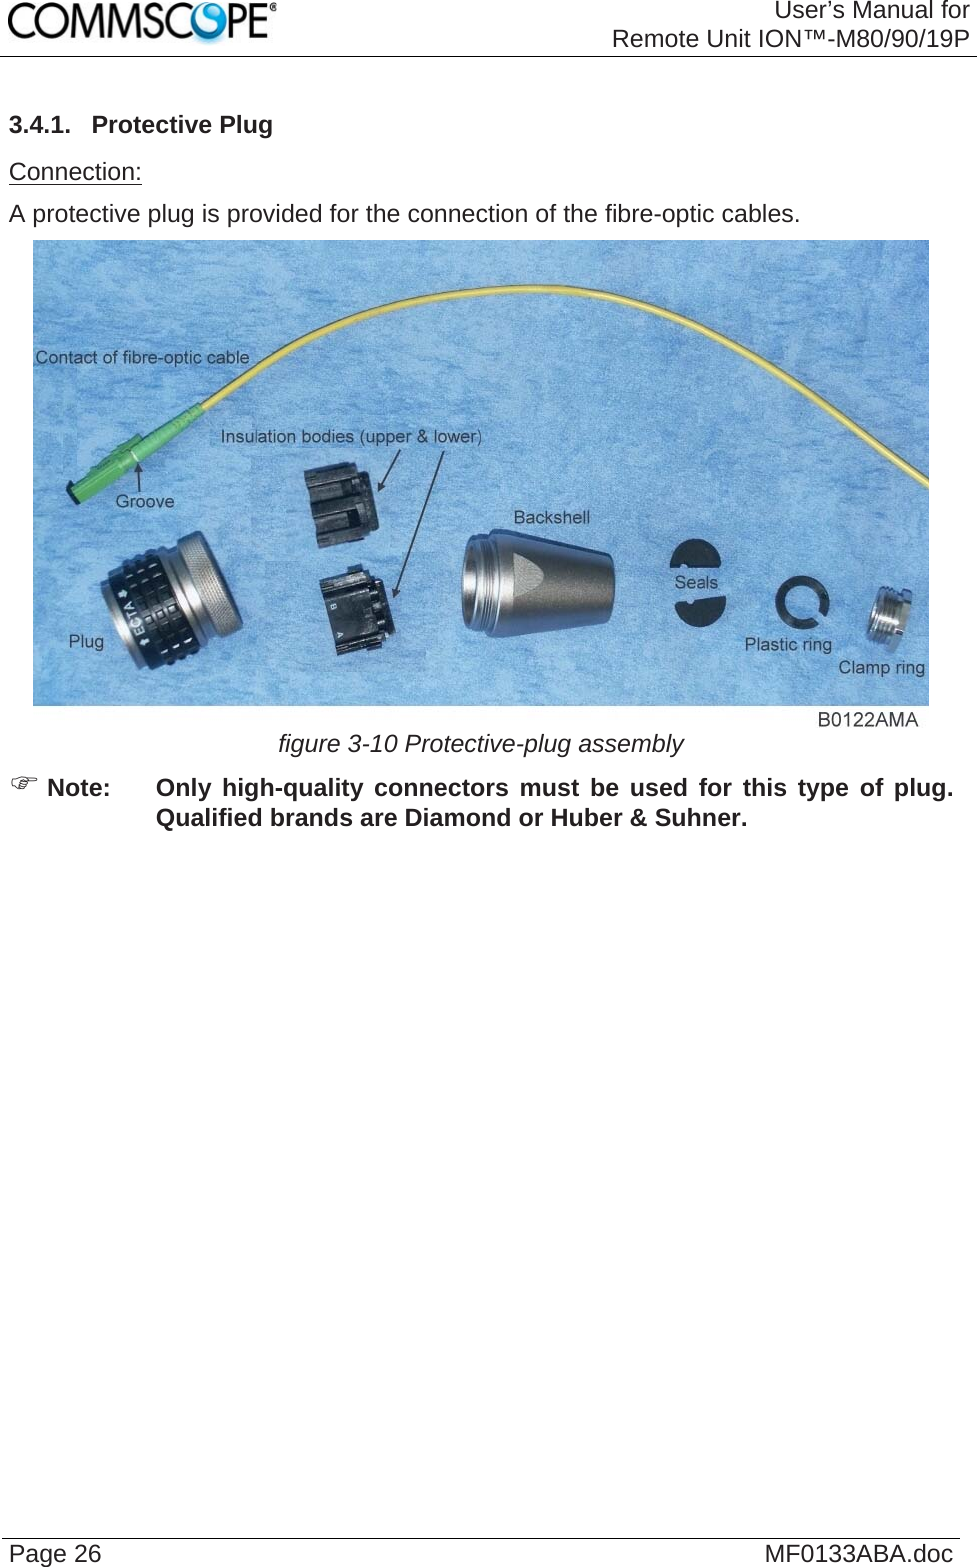 User’s Manual forRemote Unit ION™-M80/90/19P Page 26  MF0133ABA.doc3.4.1.  Protective Plug Connection: A protective plug is provided for the connection of the fibre-optic cables.  figure 3-10 Protective-plug assembly ) Note:  Only high-quality connectors must be used for this type of plug. Qualified brands are Diamond or Huber &amp; Suhner.   